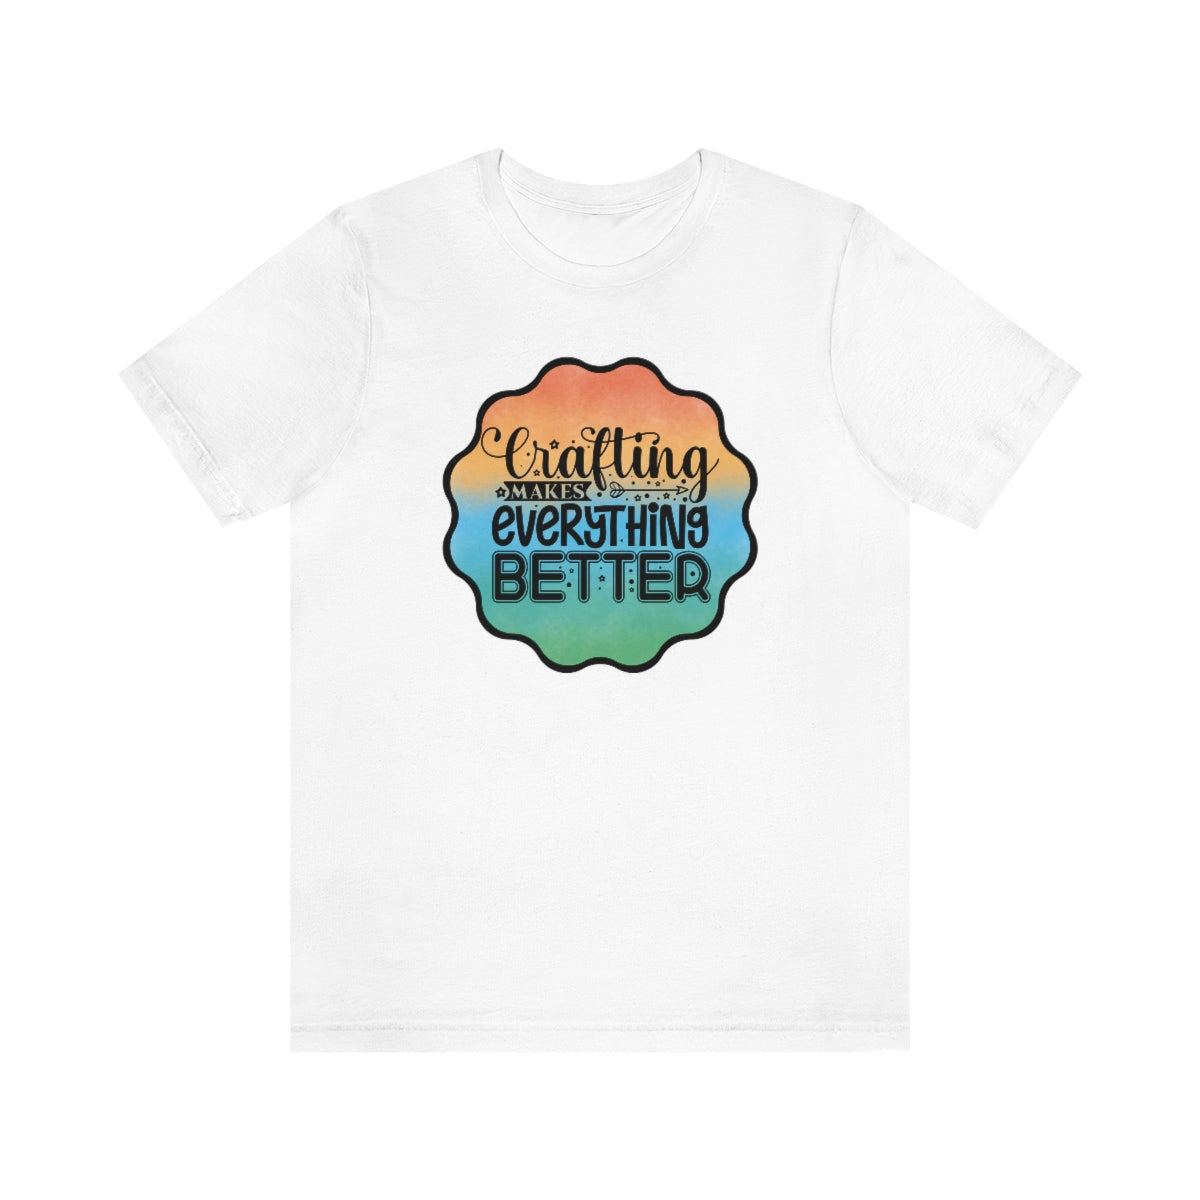 Crafting Makes Everything Better Ombre Unisex Jersey Short Sleeve Tee S-3XL